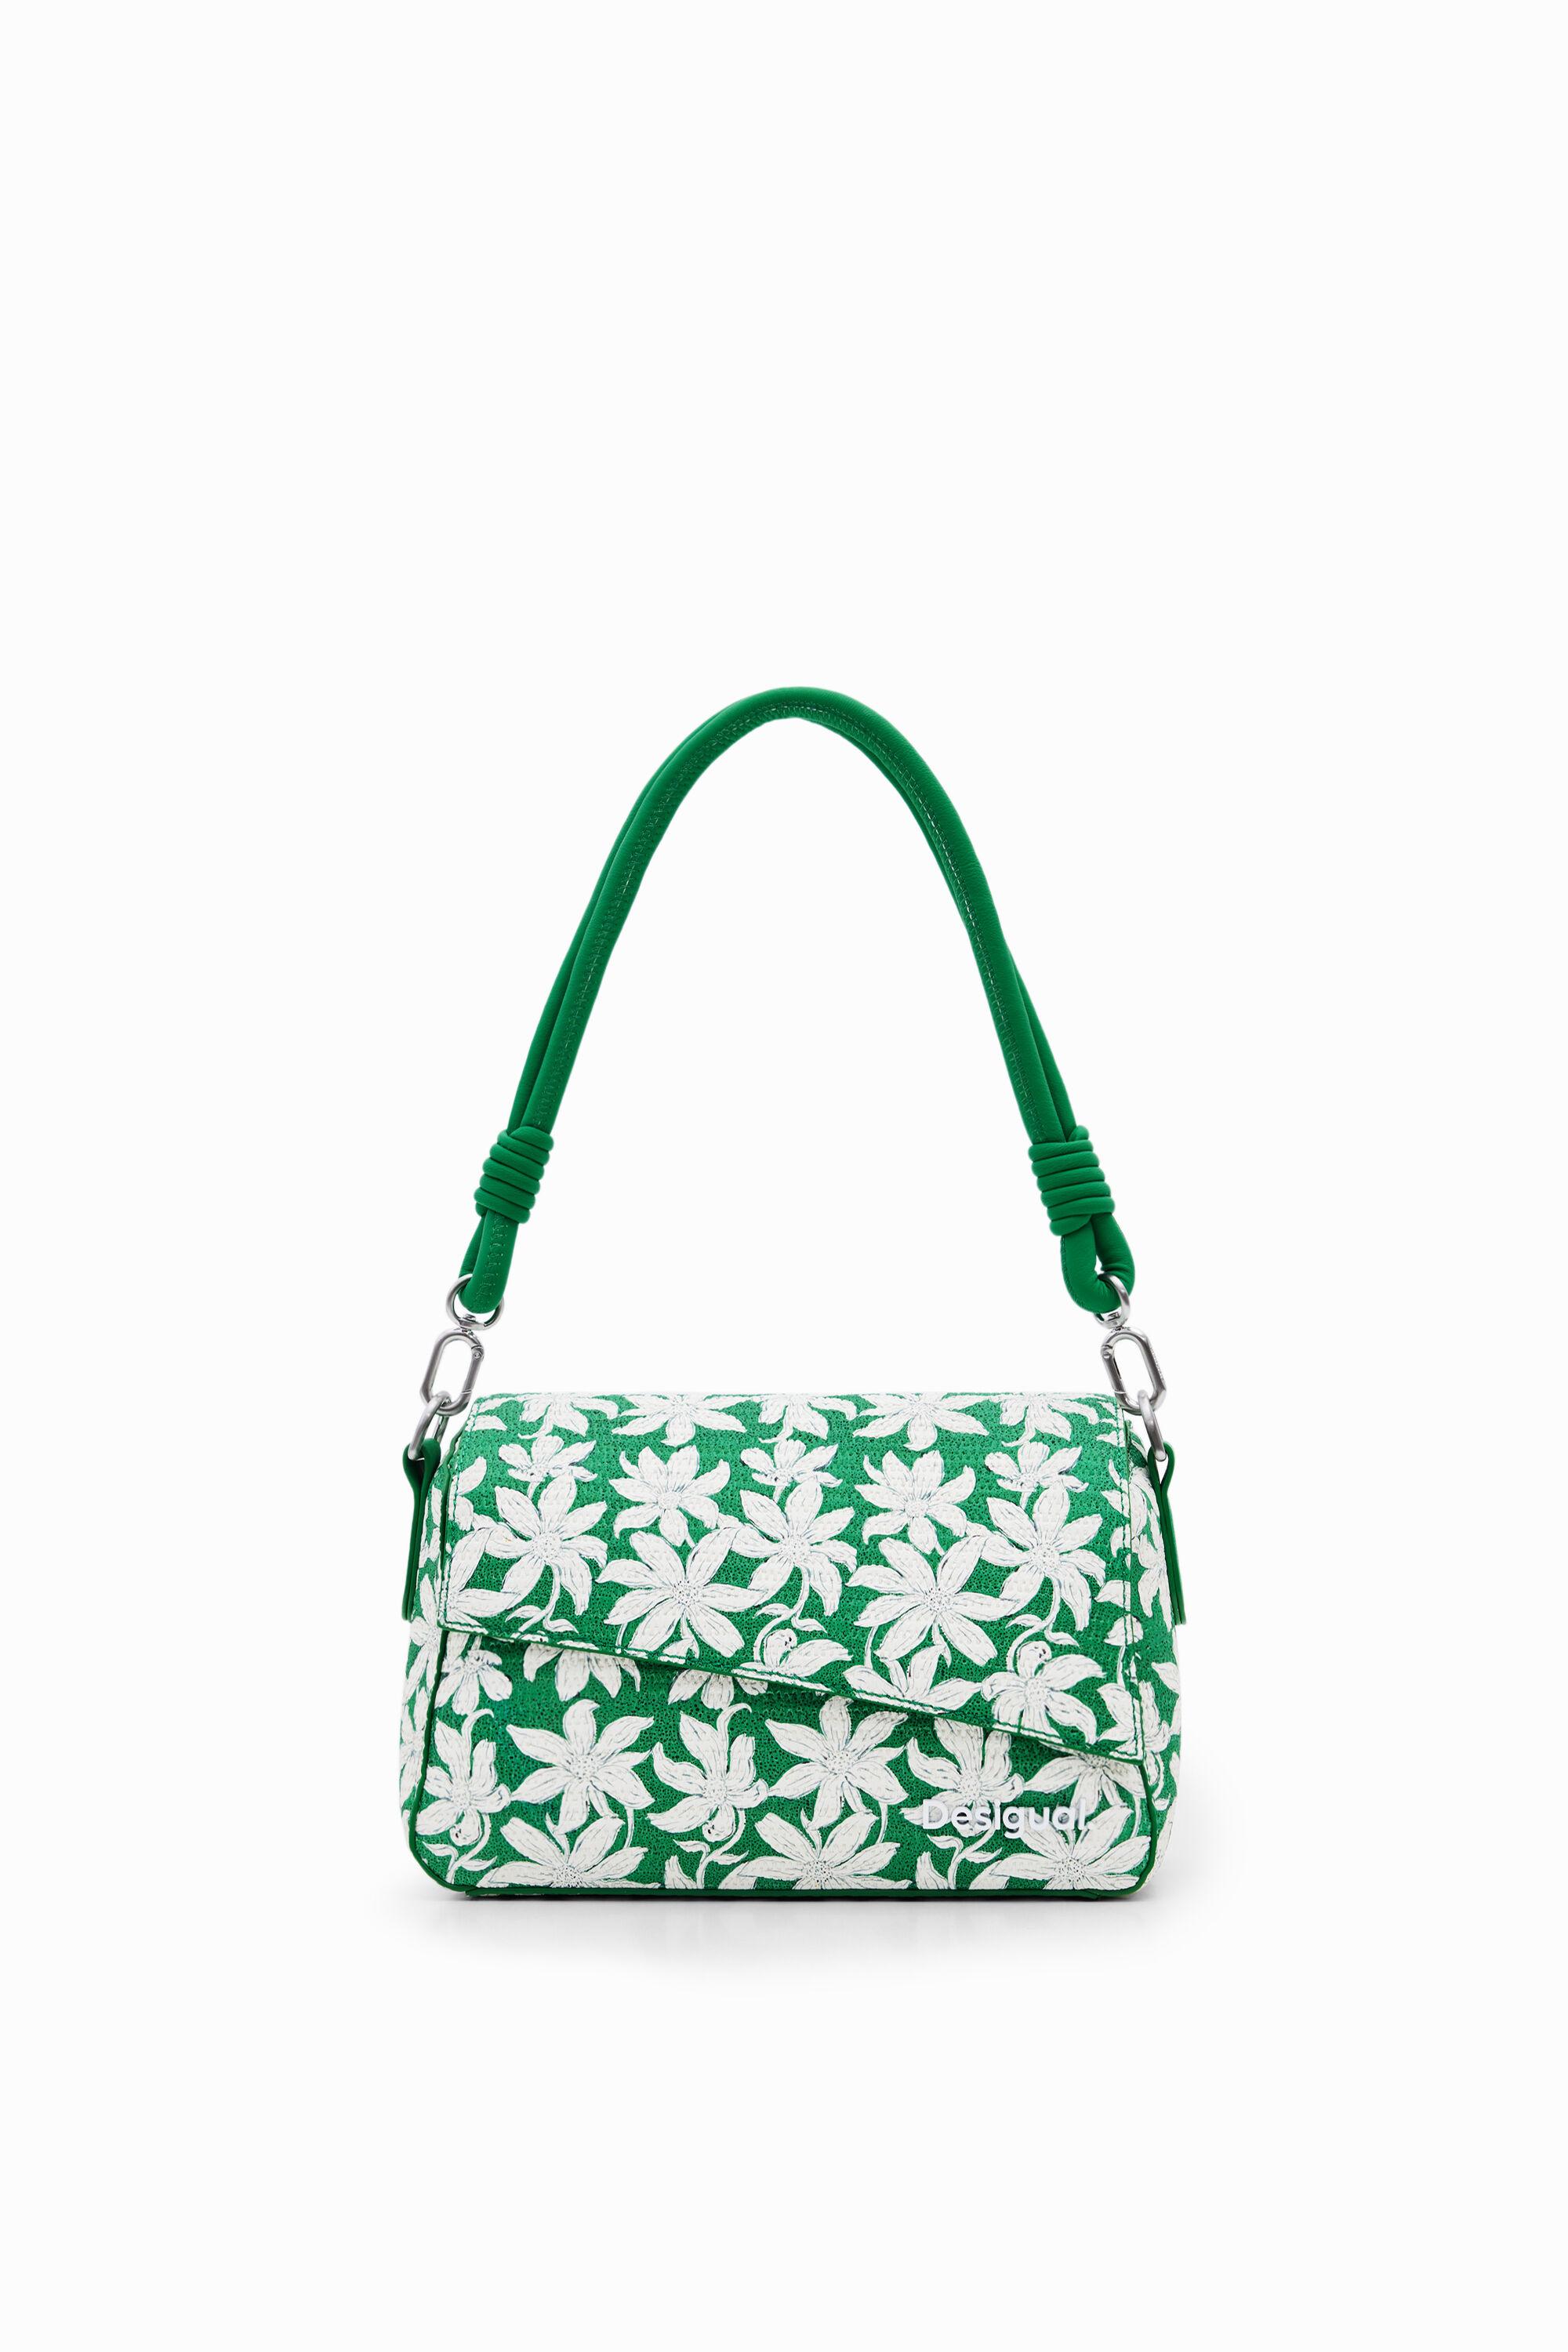 Desigual S Textured Floral Bag in Green | Lyst